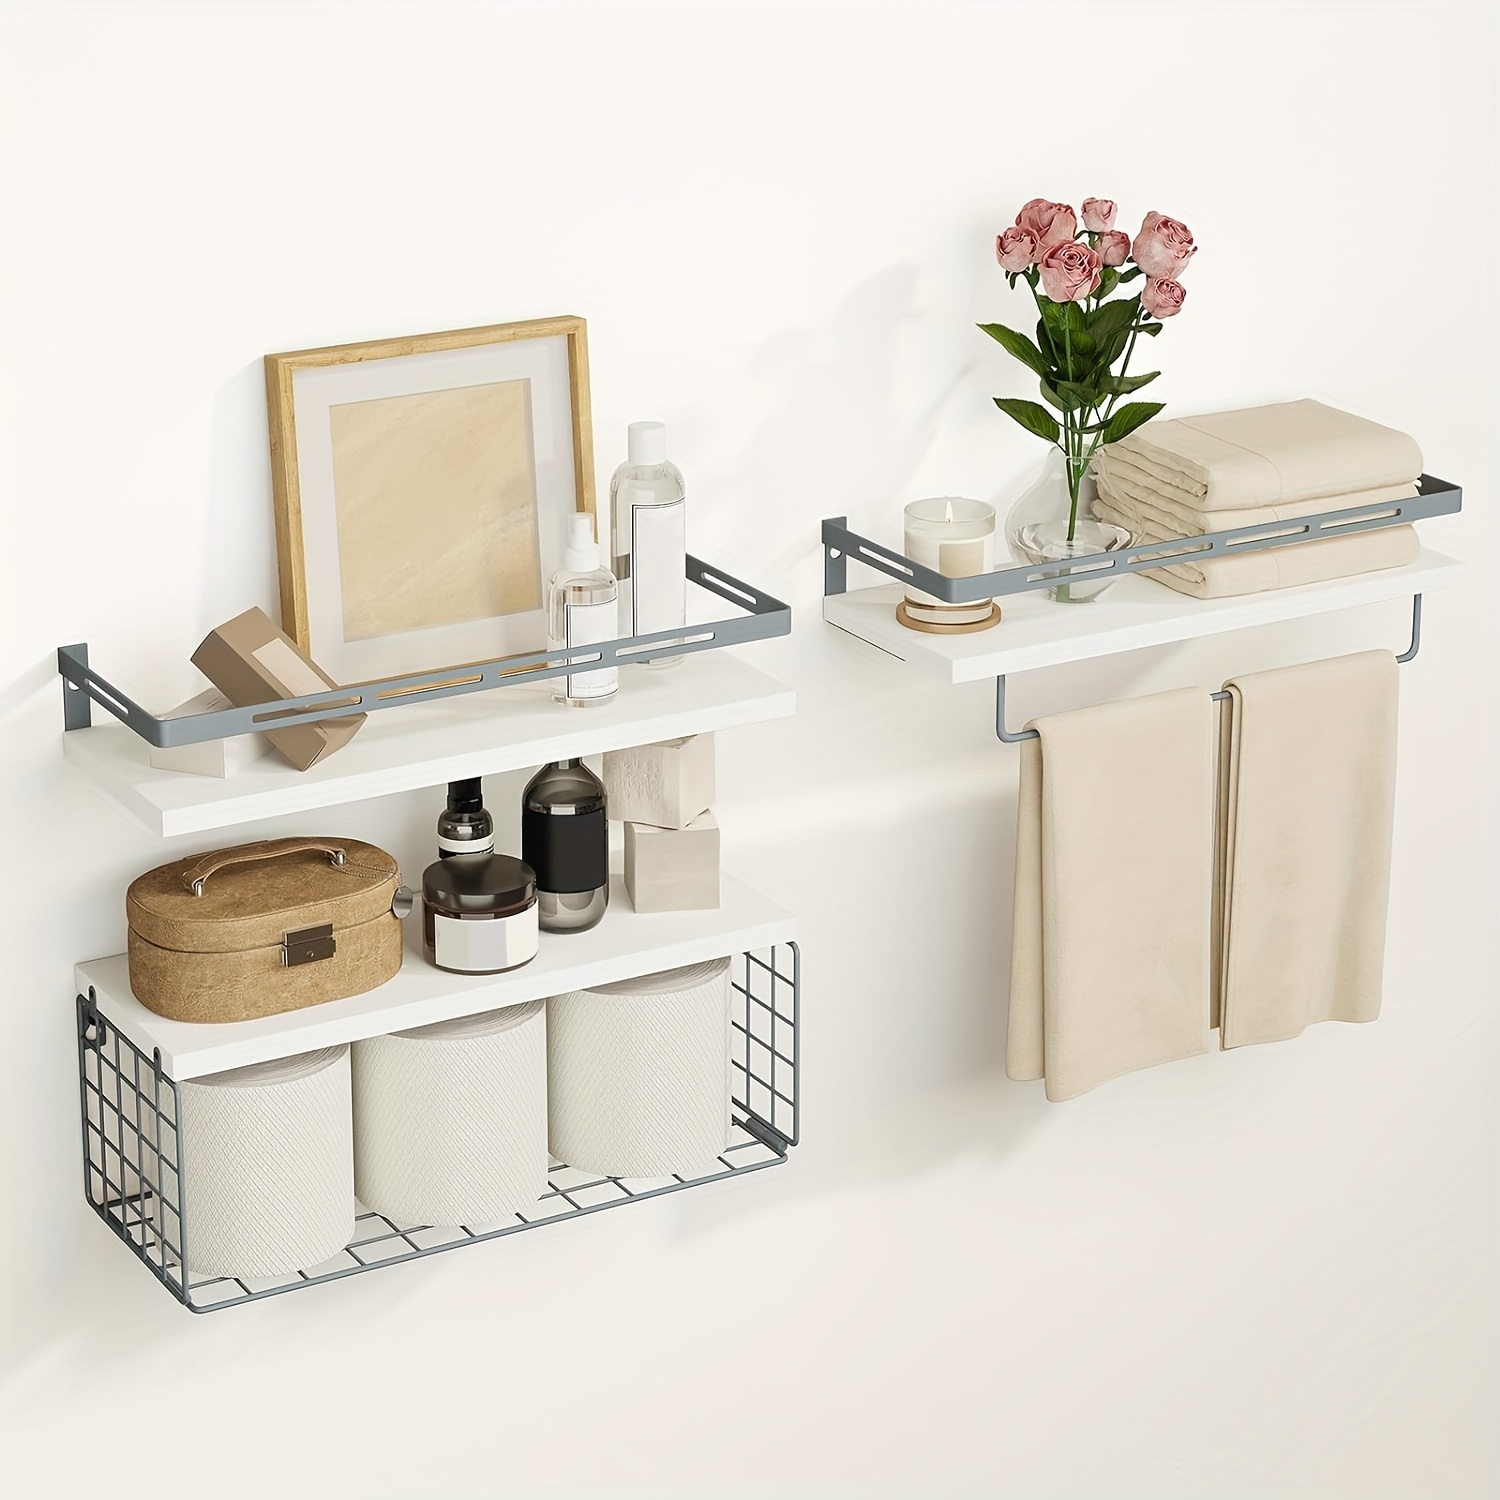 

White And Gray Bracket, 3+1 Tier Bathroom Shelves, Wall Mounted Floating Shelves With Metal Frame, Over Toilet With Wire Storage Basket And Towel Bar For Bathroom, Kitchen, Bedroom